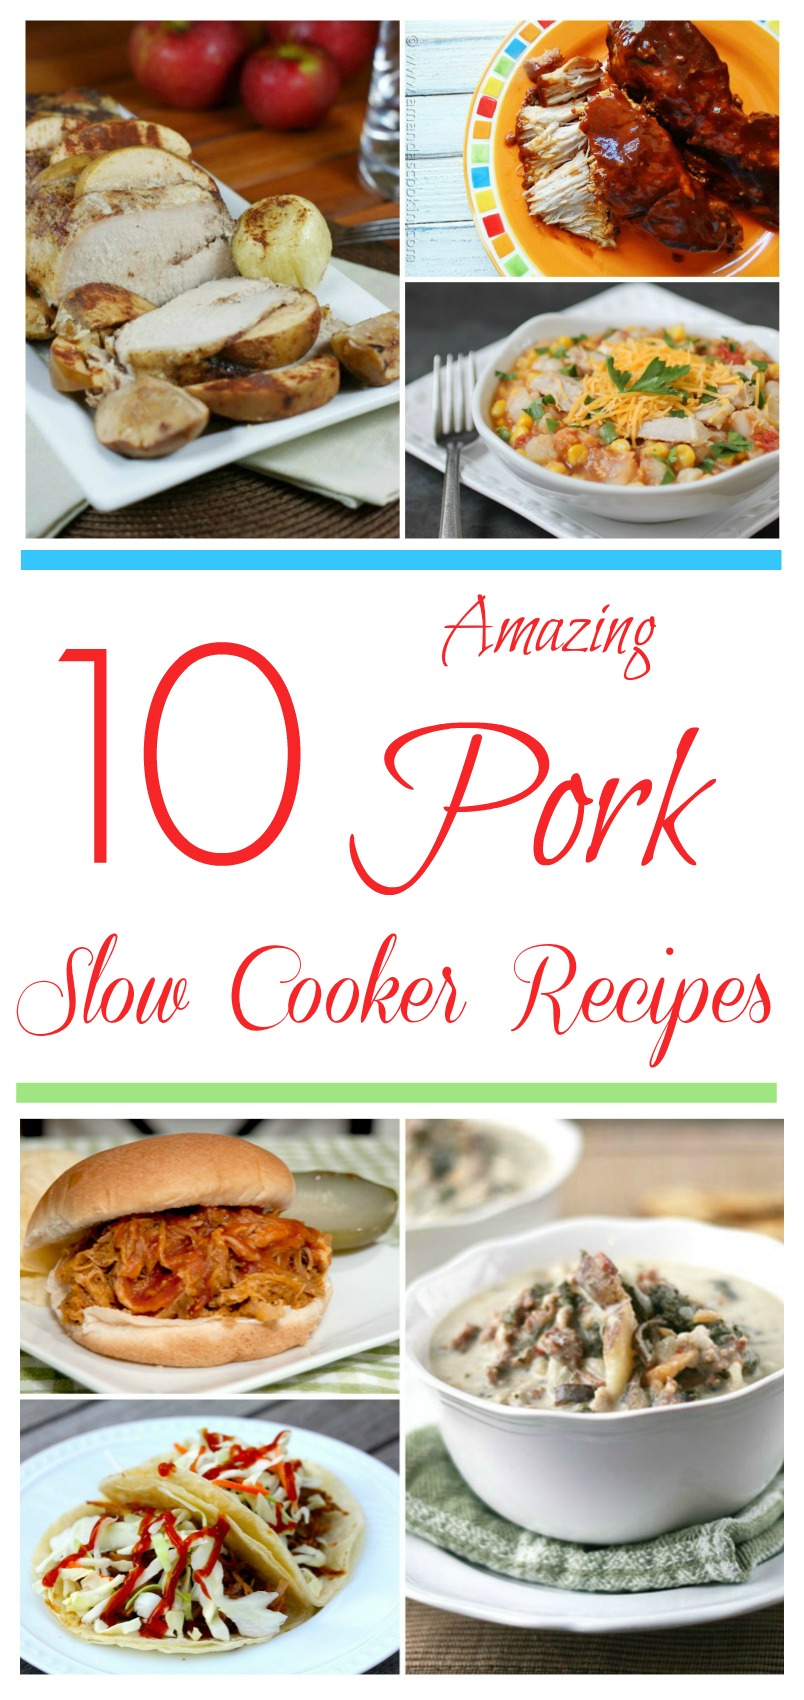 Looking for delicious pork recipes for your slow cooker? Check out these 10 Amazing Pork Slow Cooker Recipes that are perfect for any family!